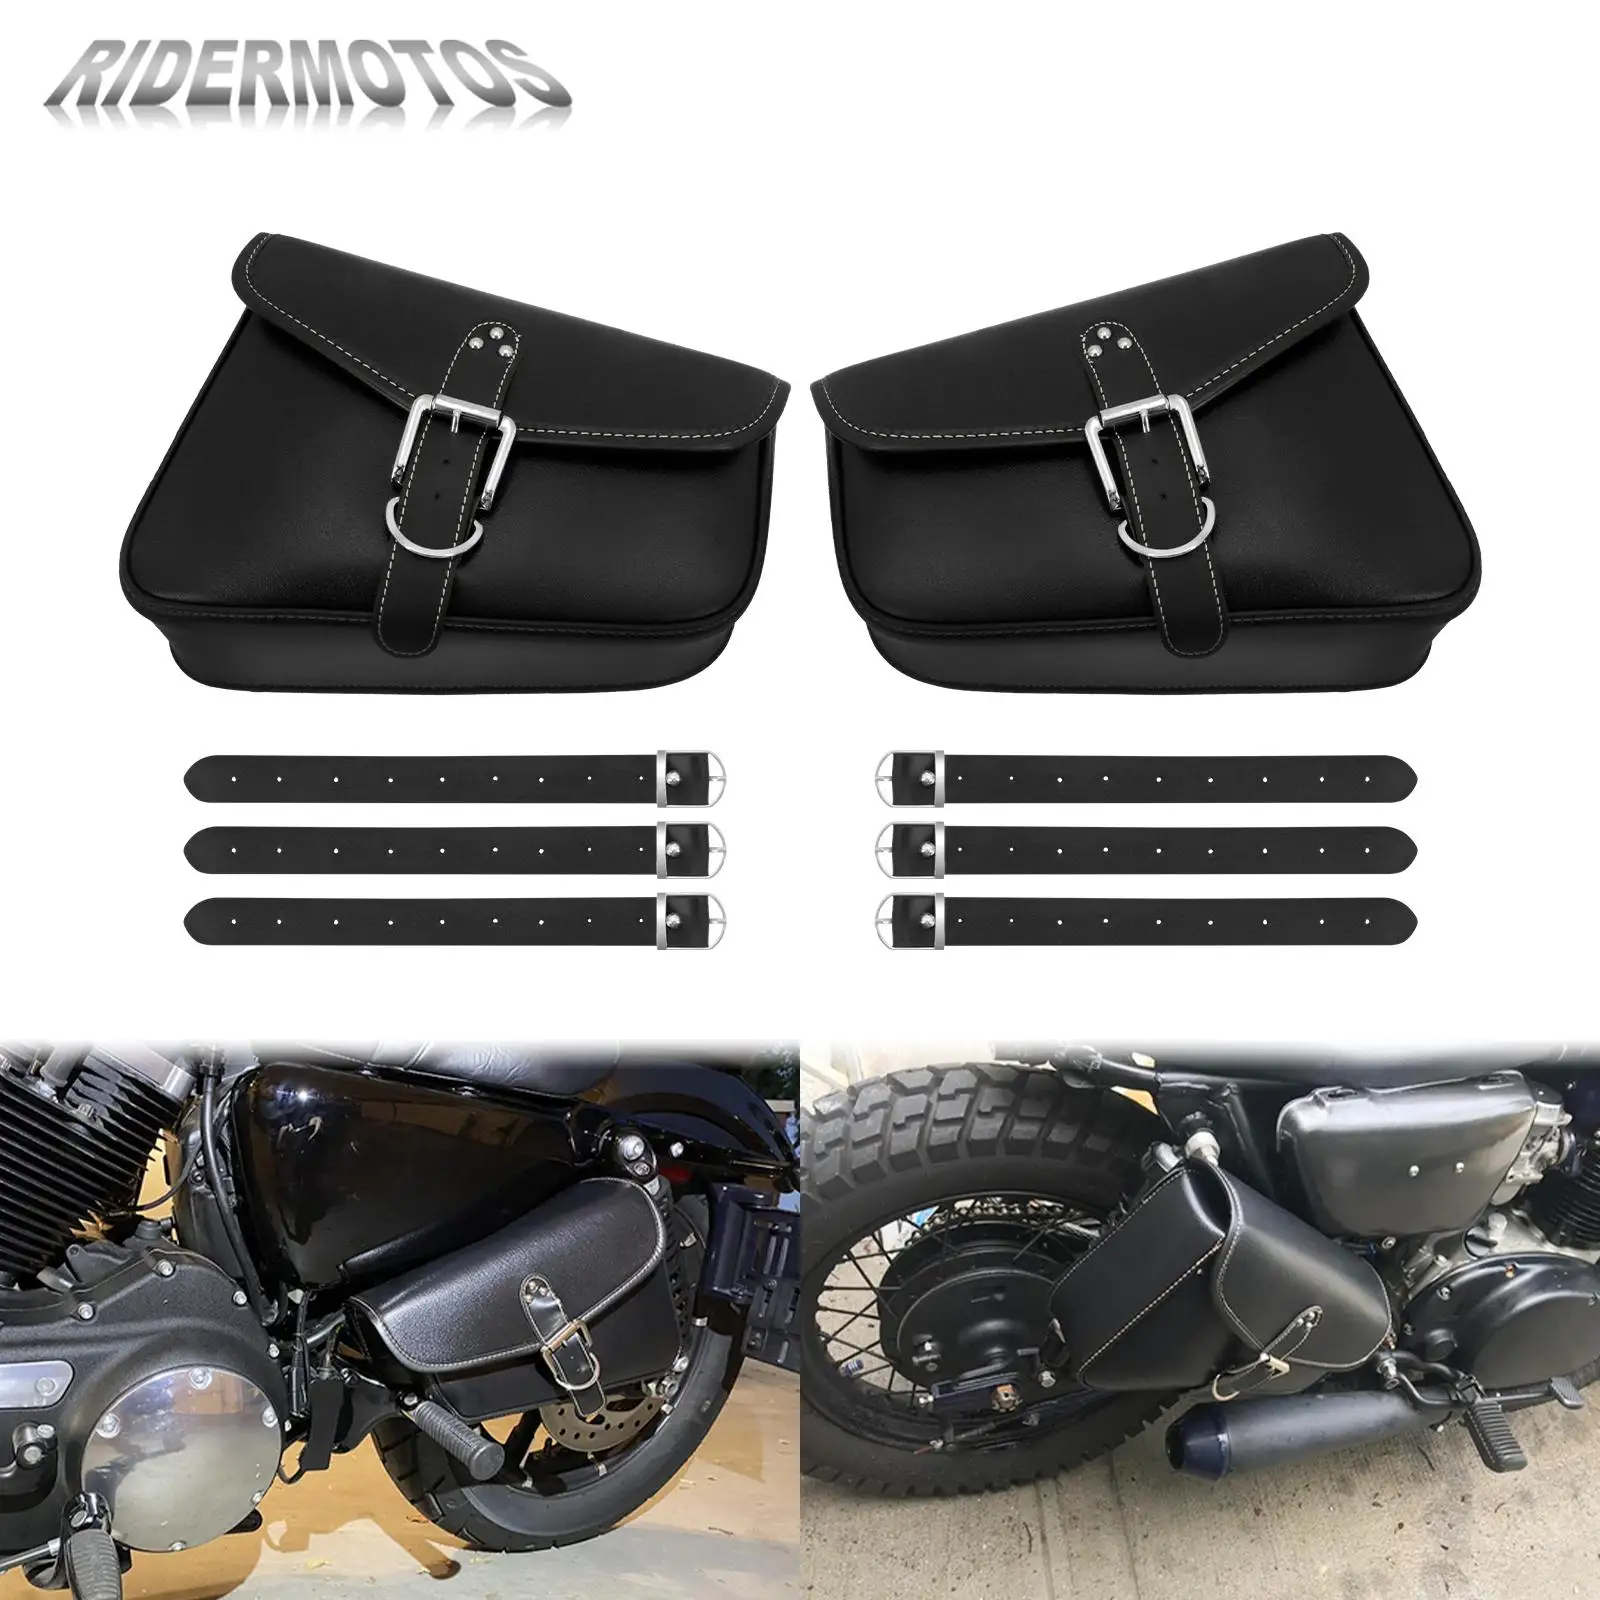 

Motorcycle PU Leather SaddleBags Side Waterproof Tool Bags For Harley Sportster XL883 1200 Dyna Touring Street Glide Softail